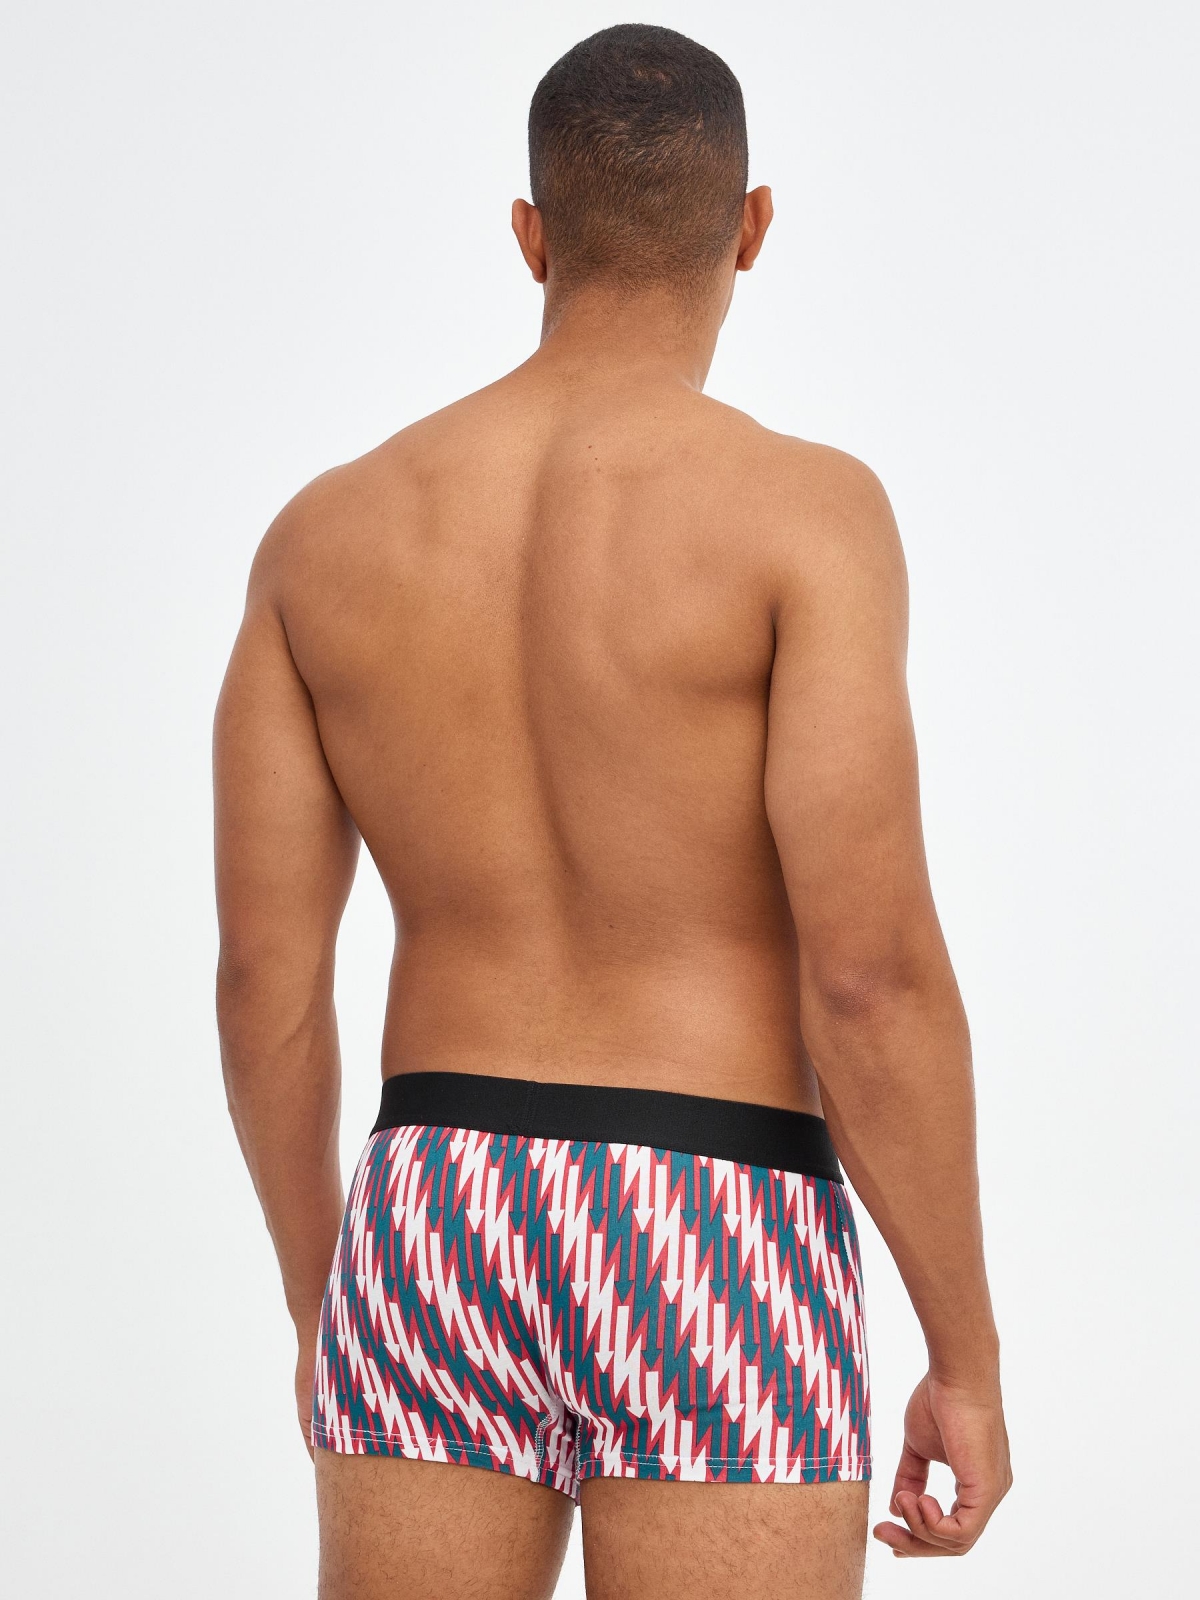 Pack 4 boxers various prints multicolor middle back view